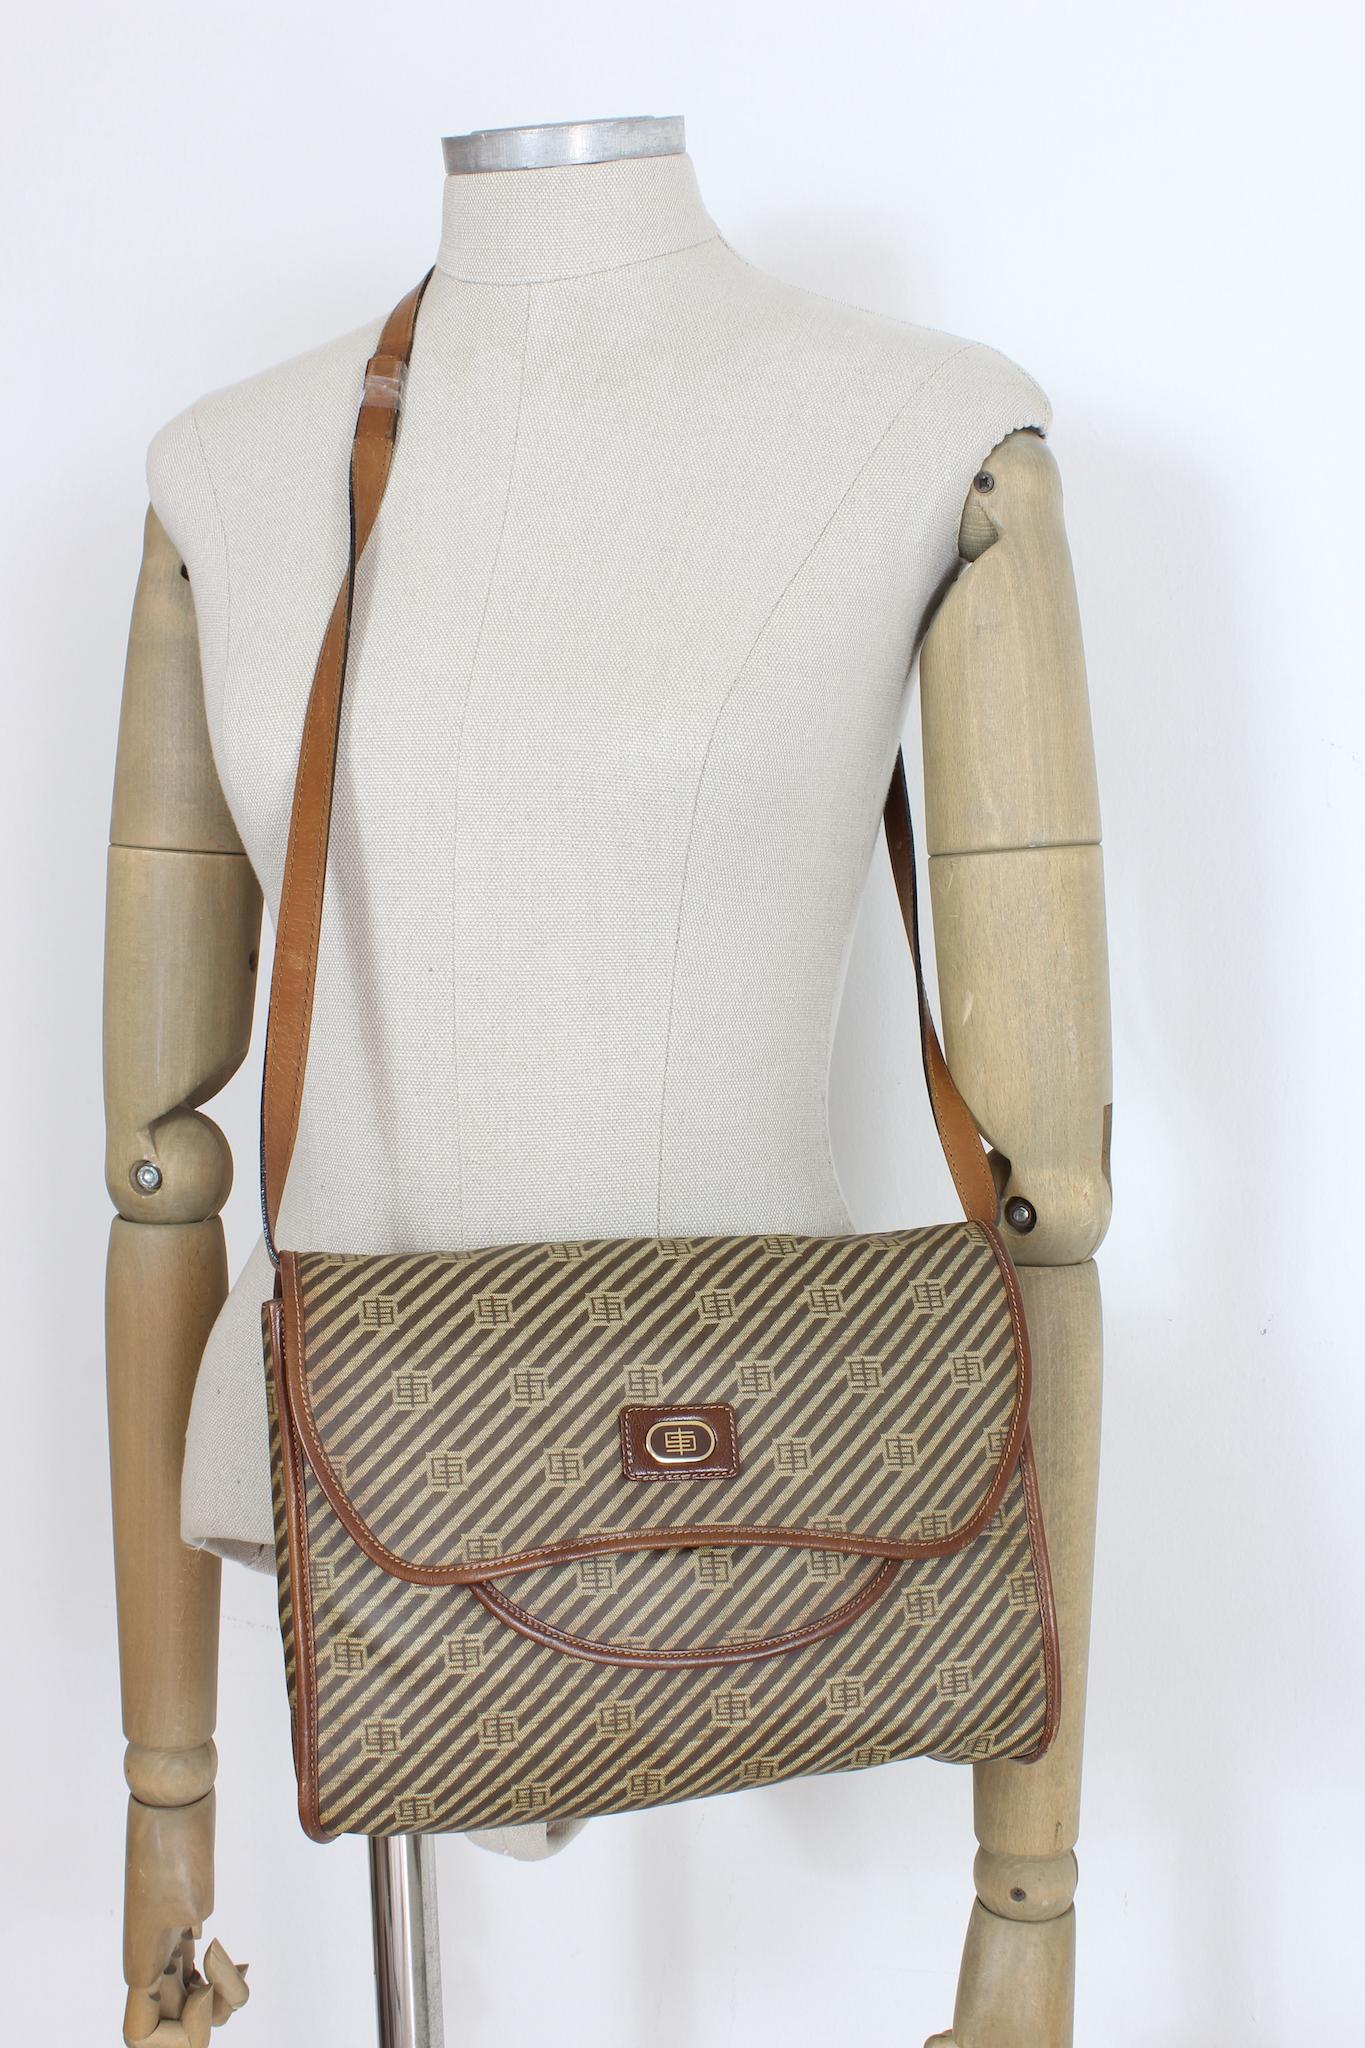 Emilio Pucci vintage shoulder bag from the 80s. Leather and canvas fabric, beige and brown monogram pattern. Adjustable shoulder strap, gold-colored metal details. Inside pockets on both sides, outside there is a zip pocket. Made in Italy.

Code: